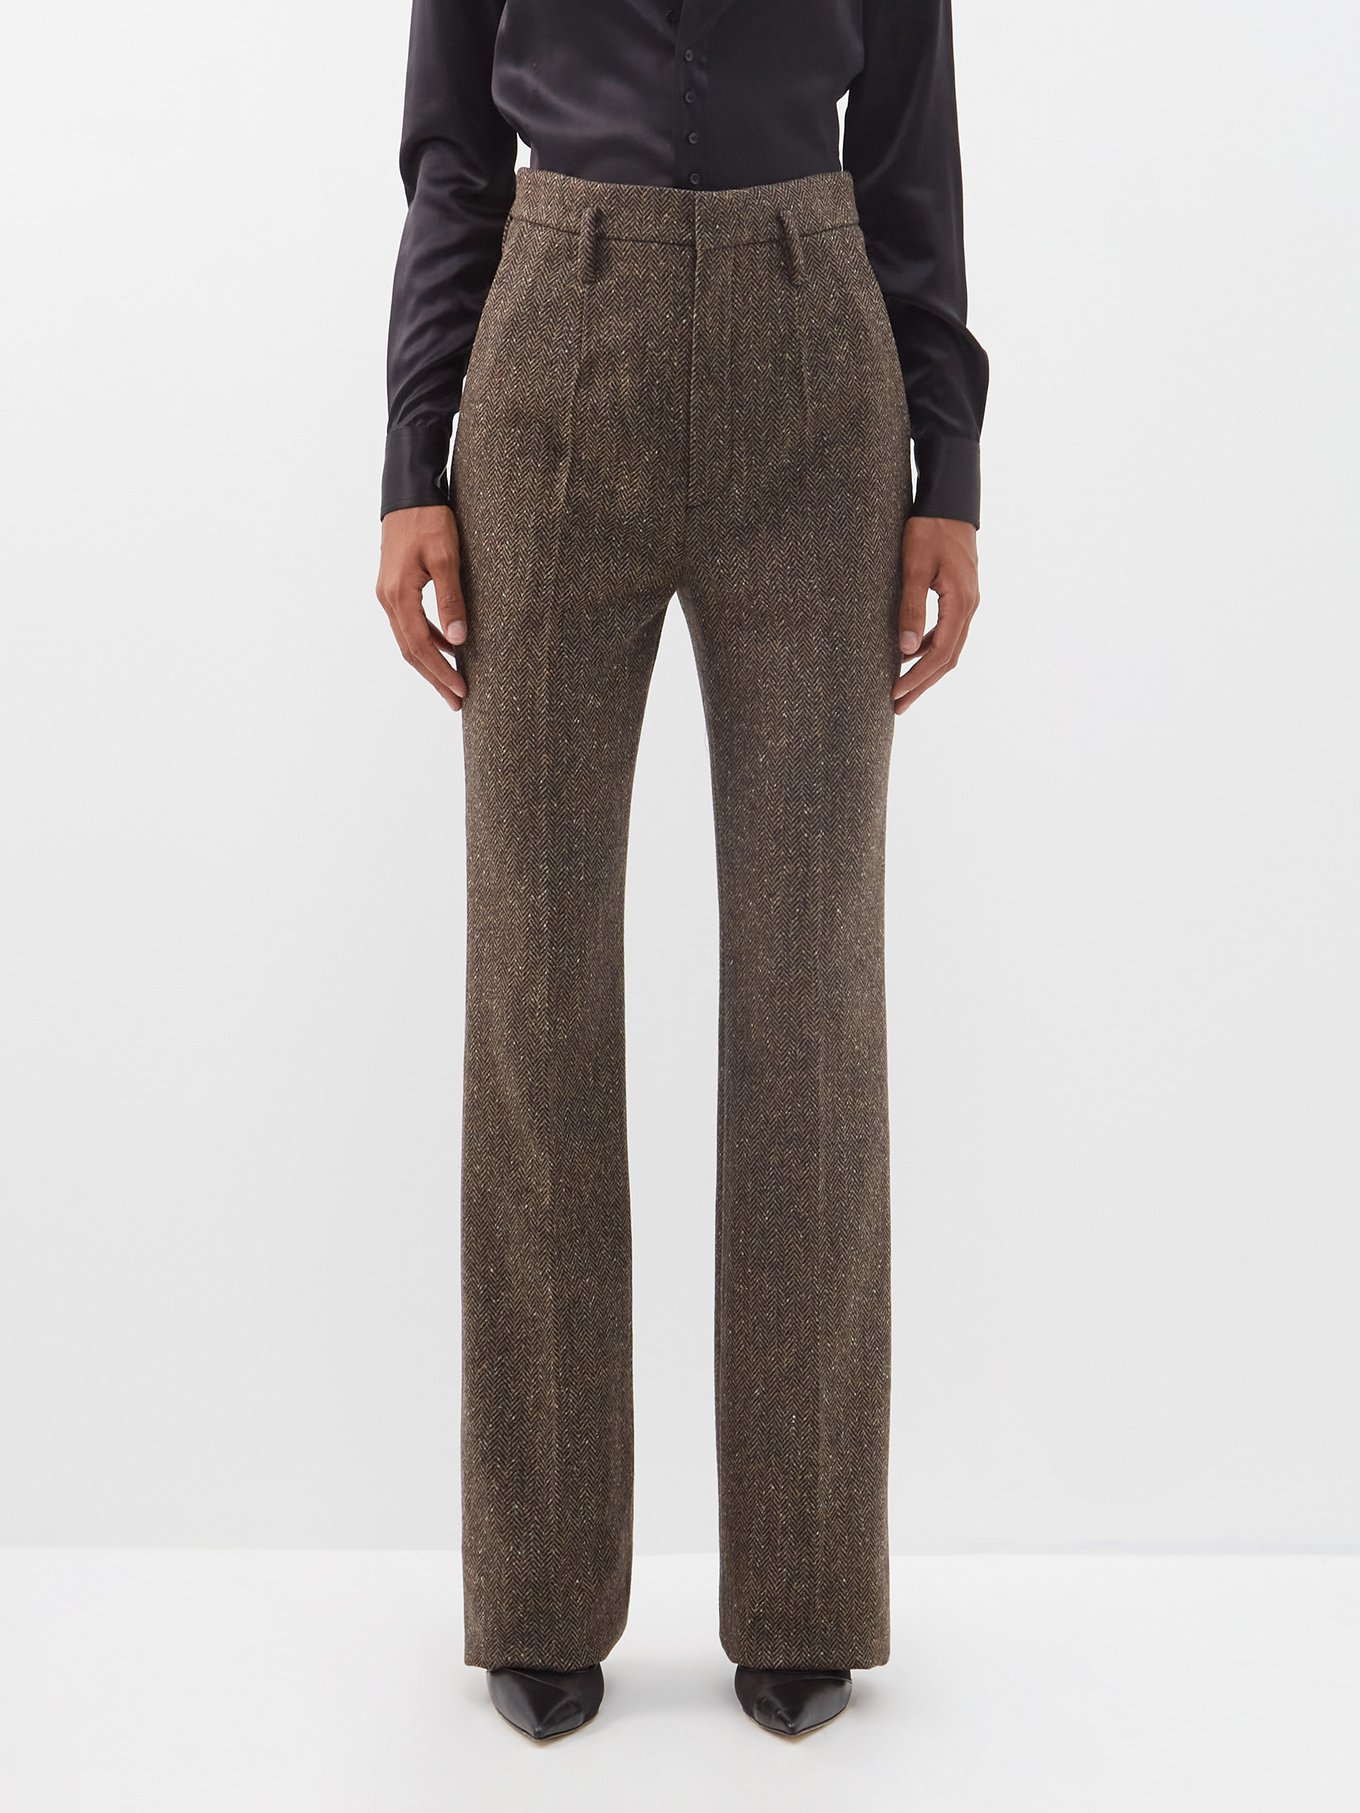 Wesley Wool Trousers  Brown and Coral Check  Boden UK